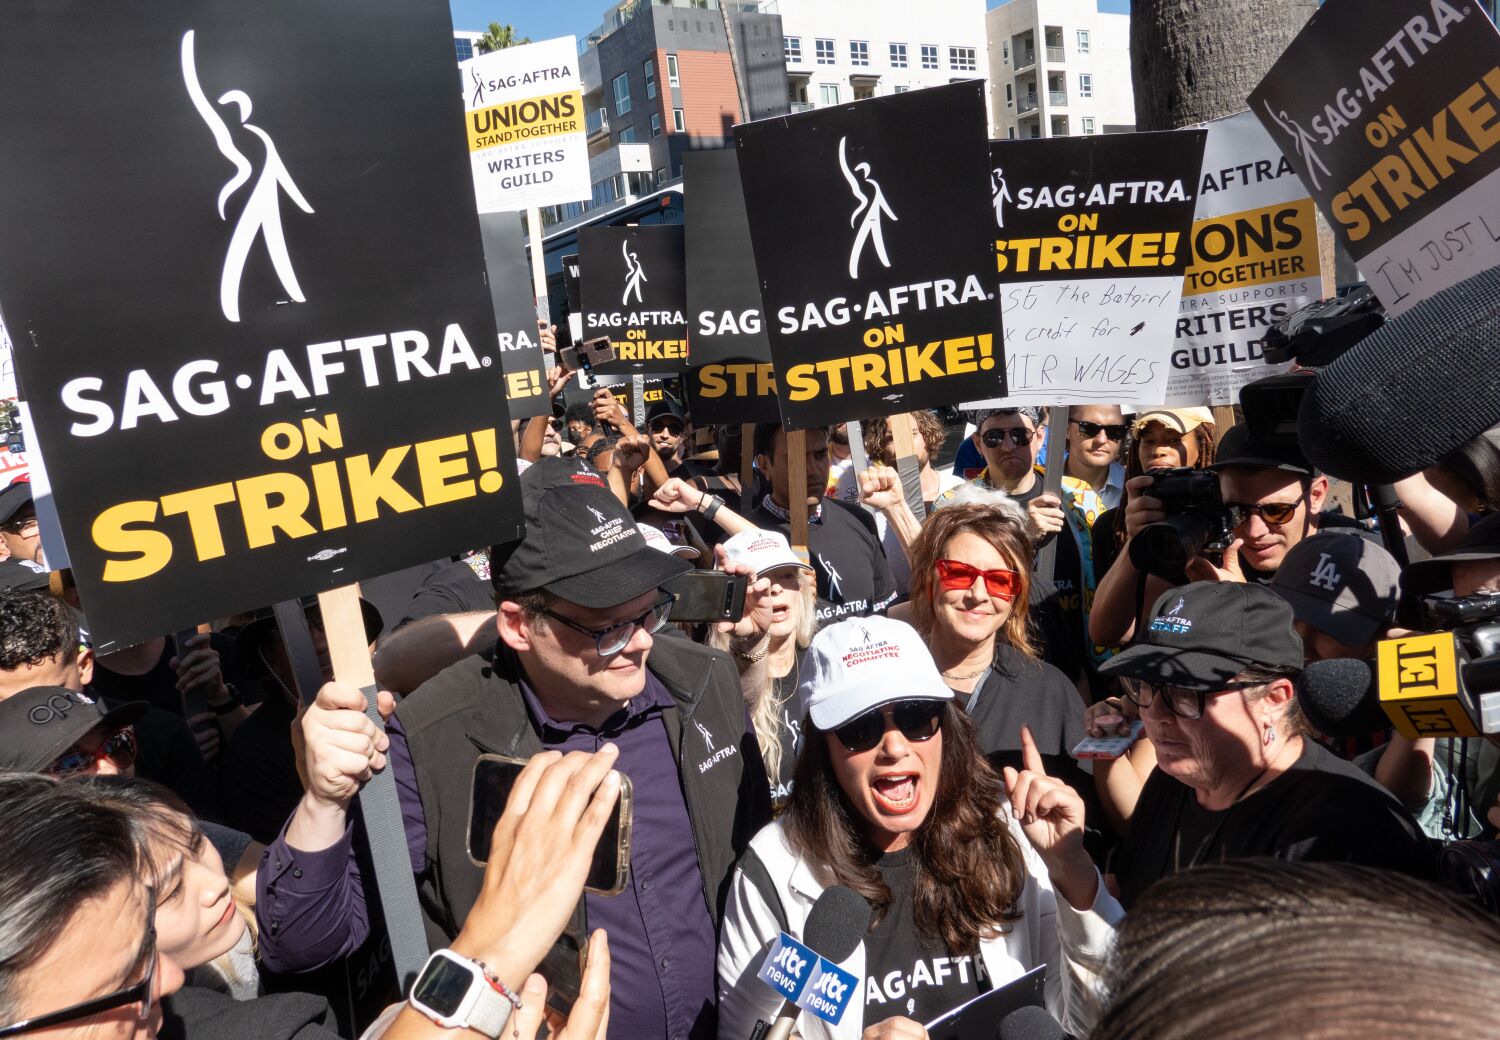 Hollywood actors hit picket lines as SAG-AFTRA joins WGA in historic double strike 